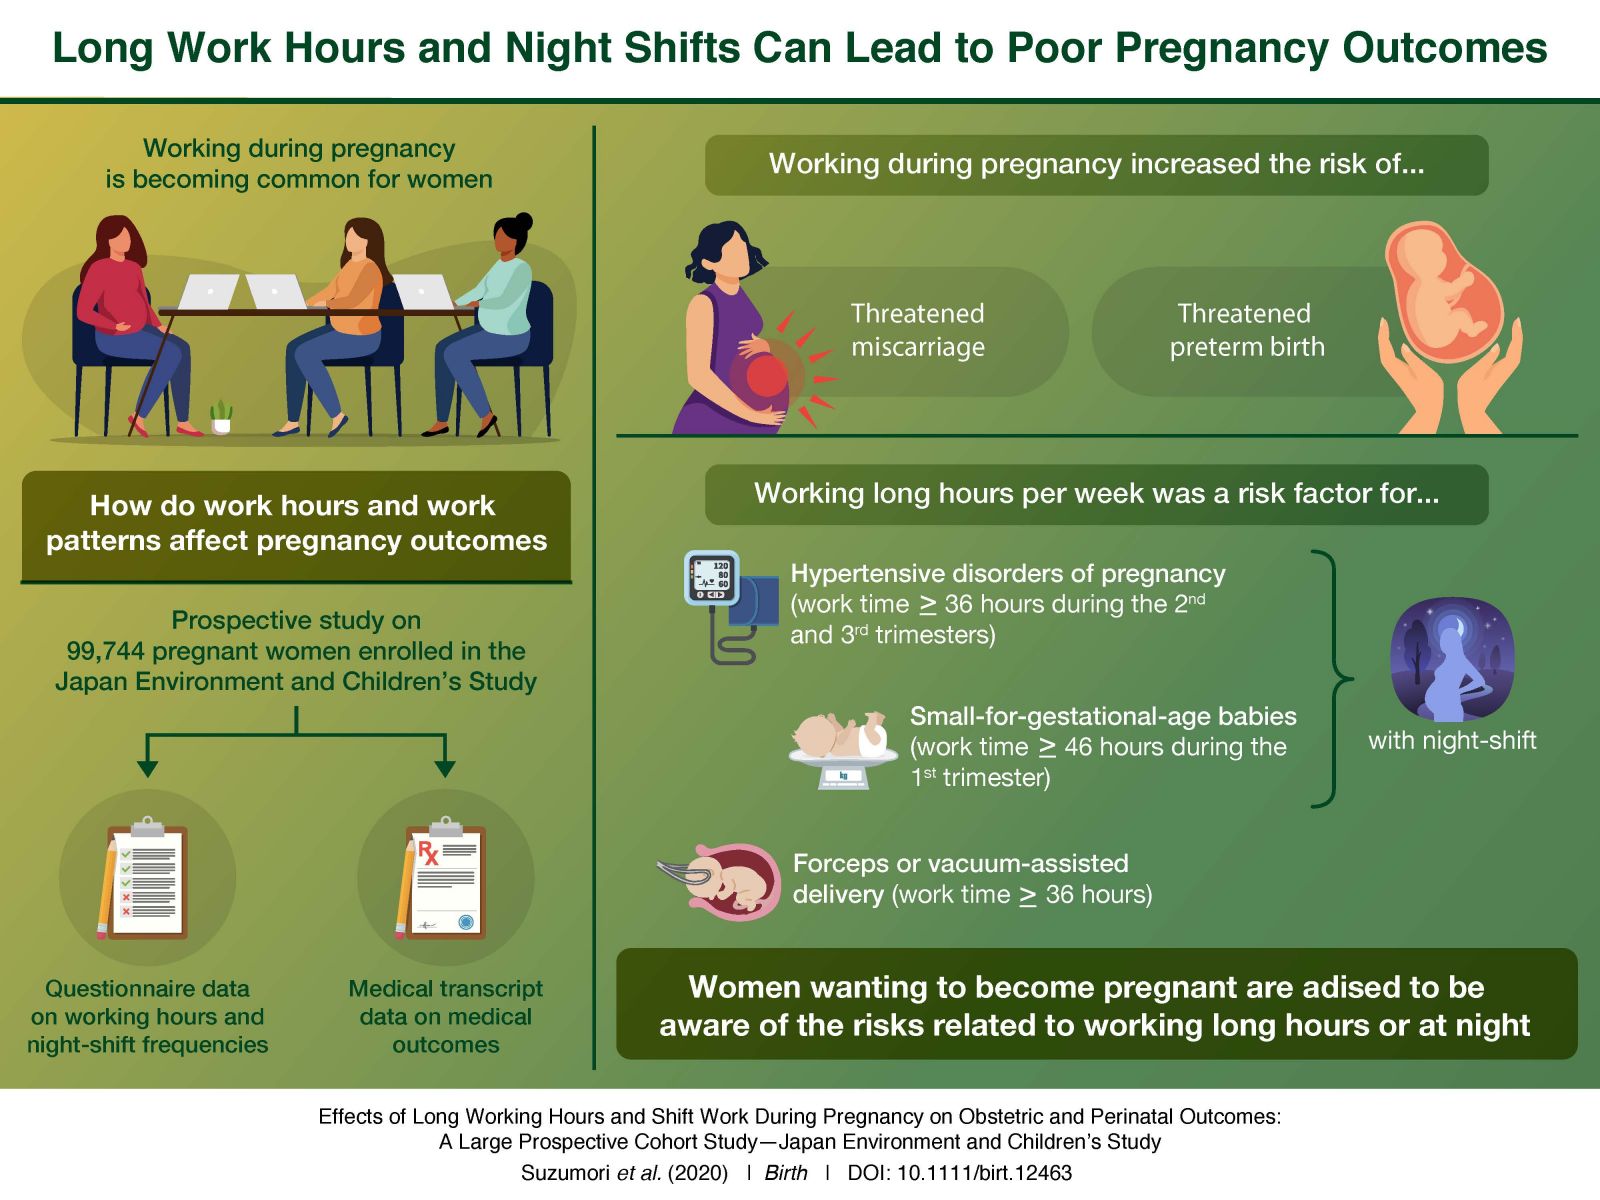 How to Work during Pregnancy and the Health of Mother and Child until Childbirth